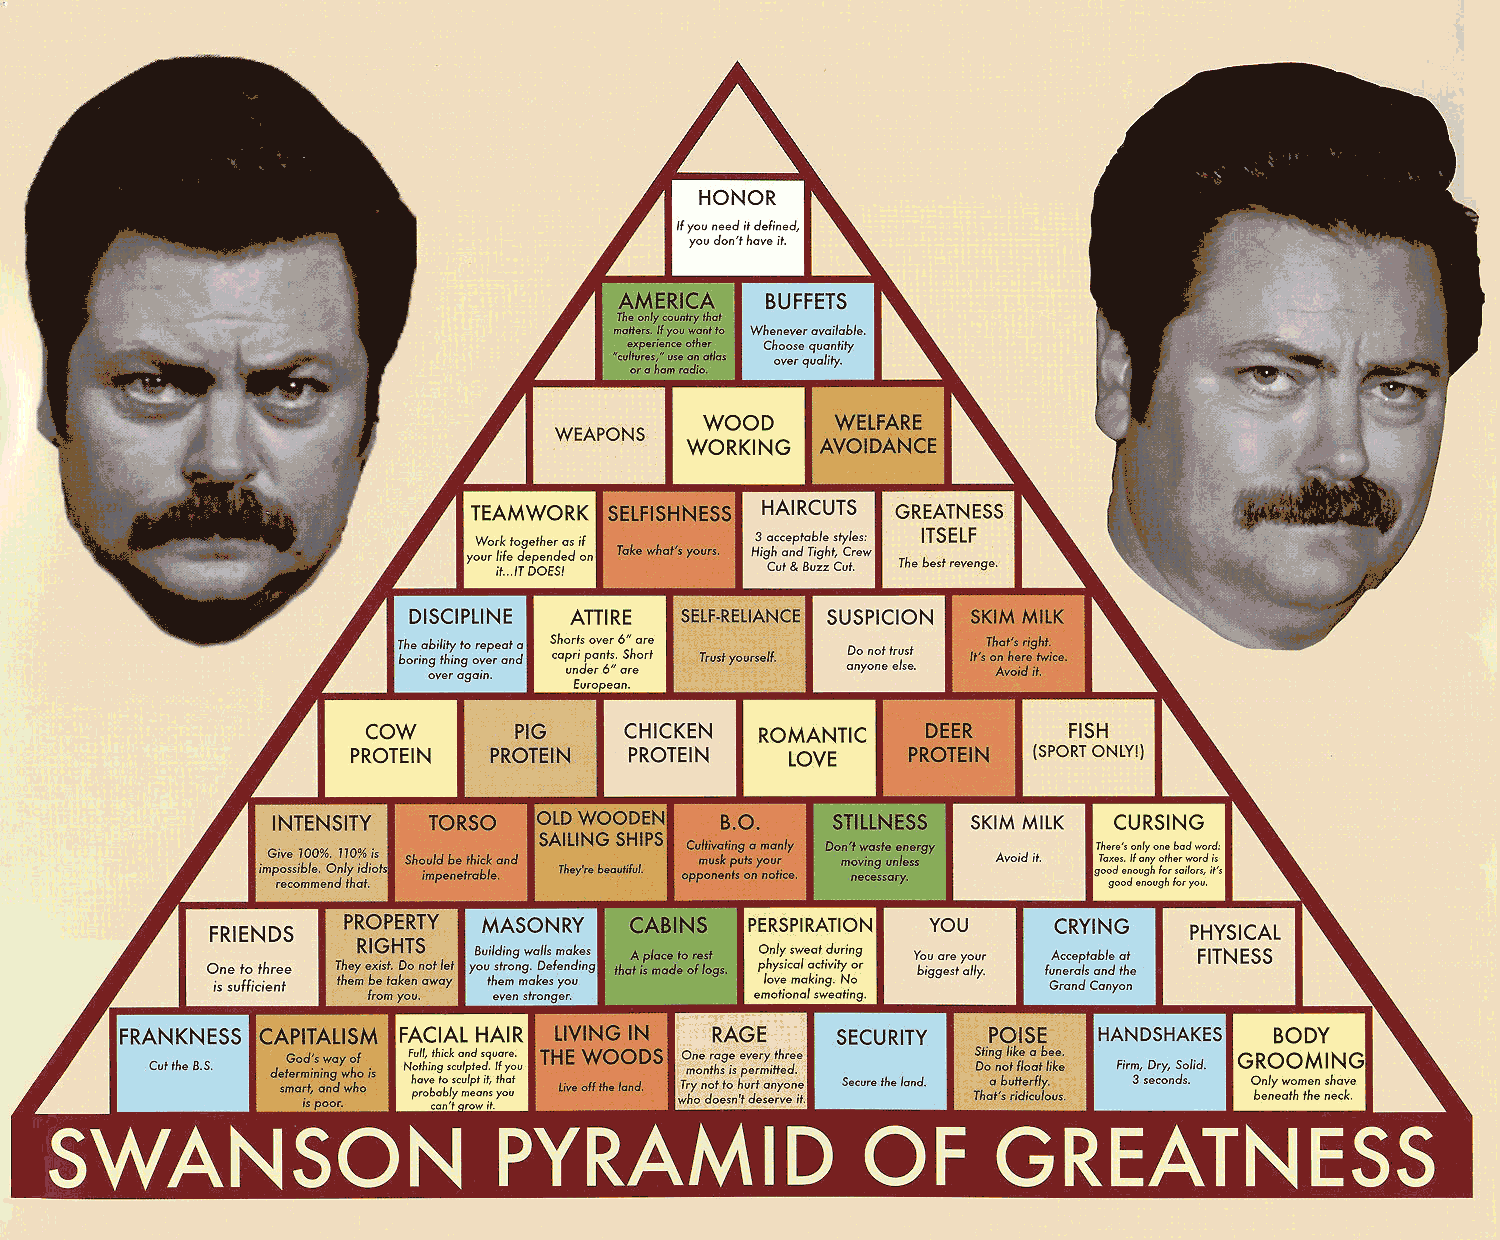 Ron-Swanson-pyramid-of-greatness.gif